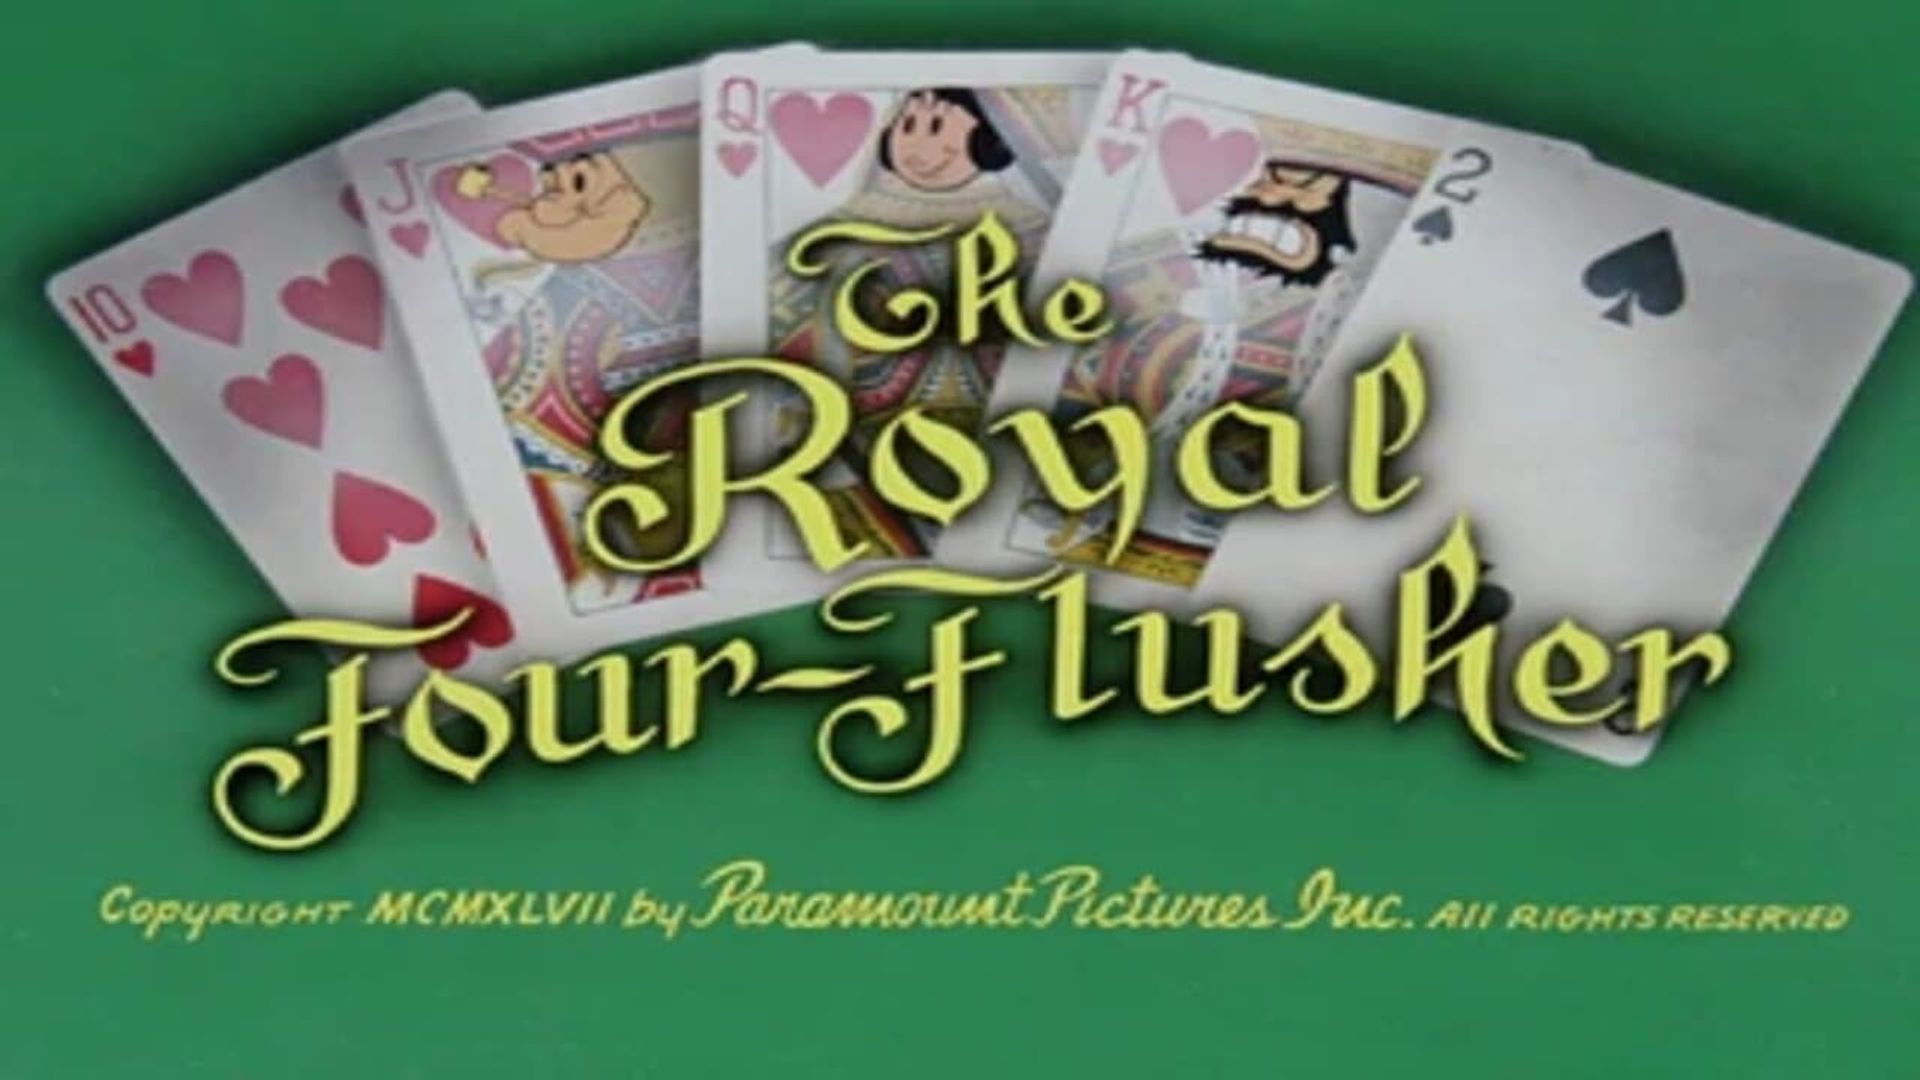 The Royal Four-Flusher background